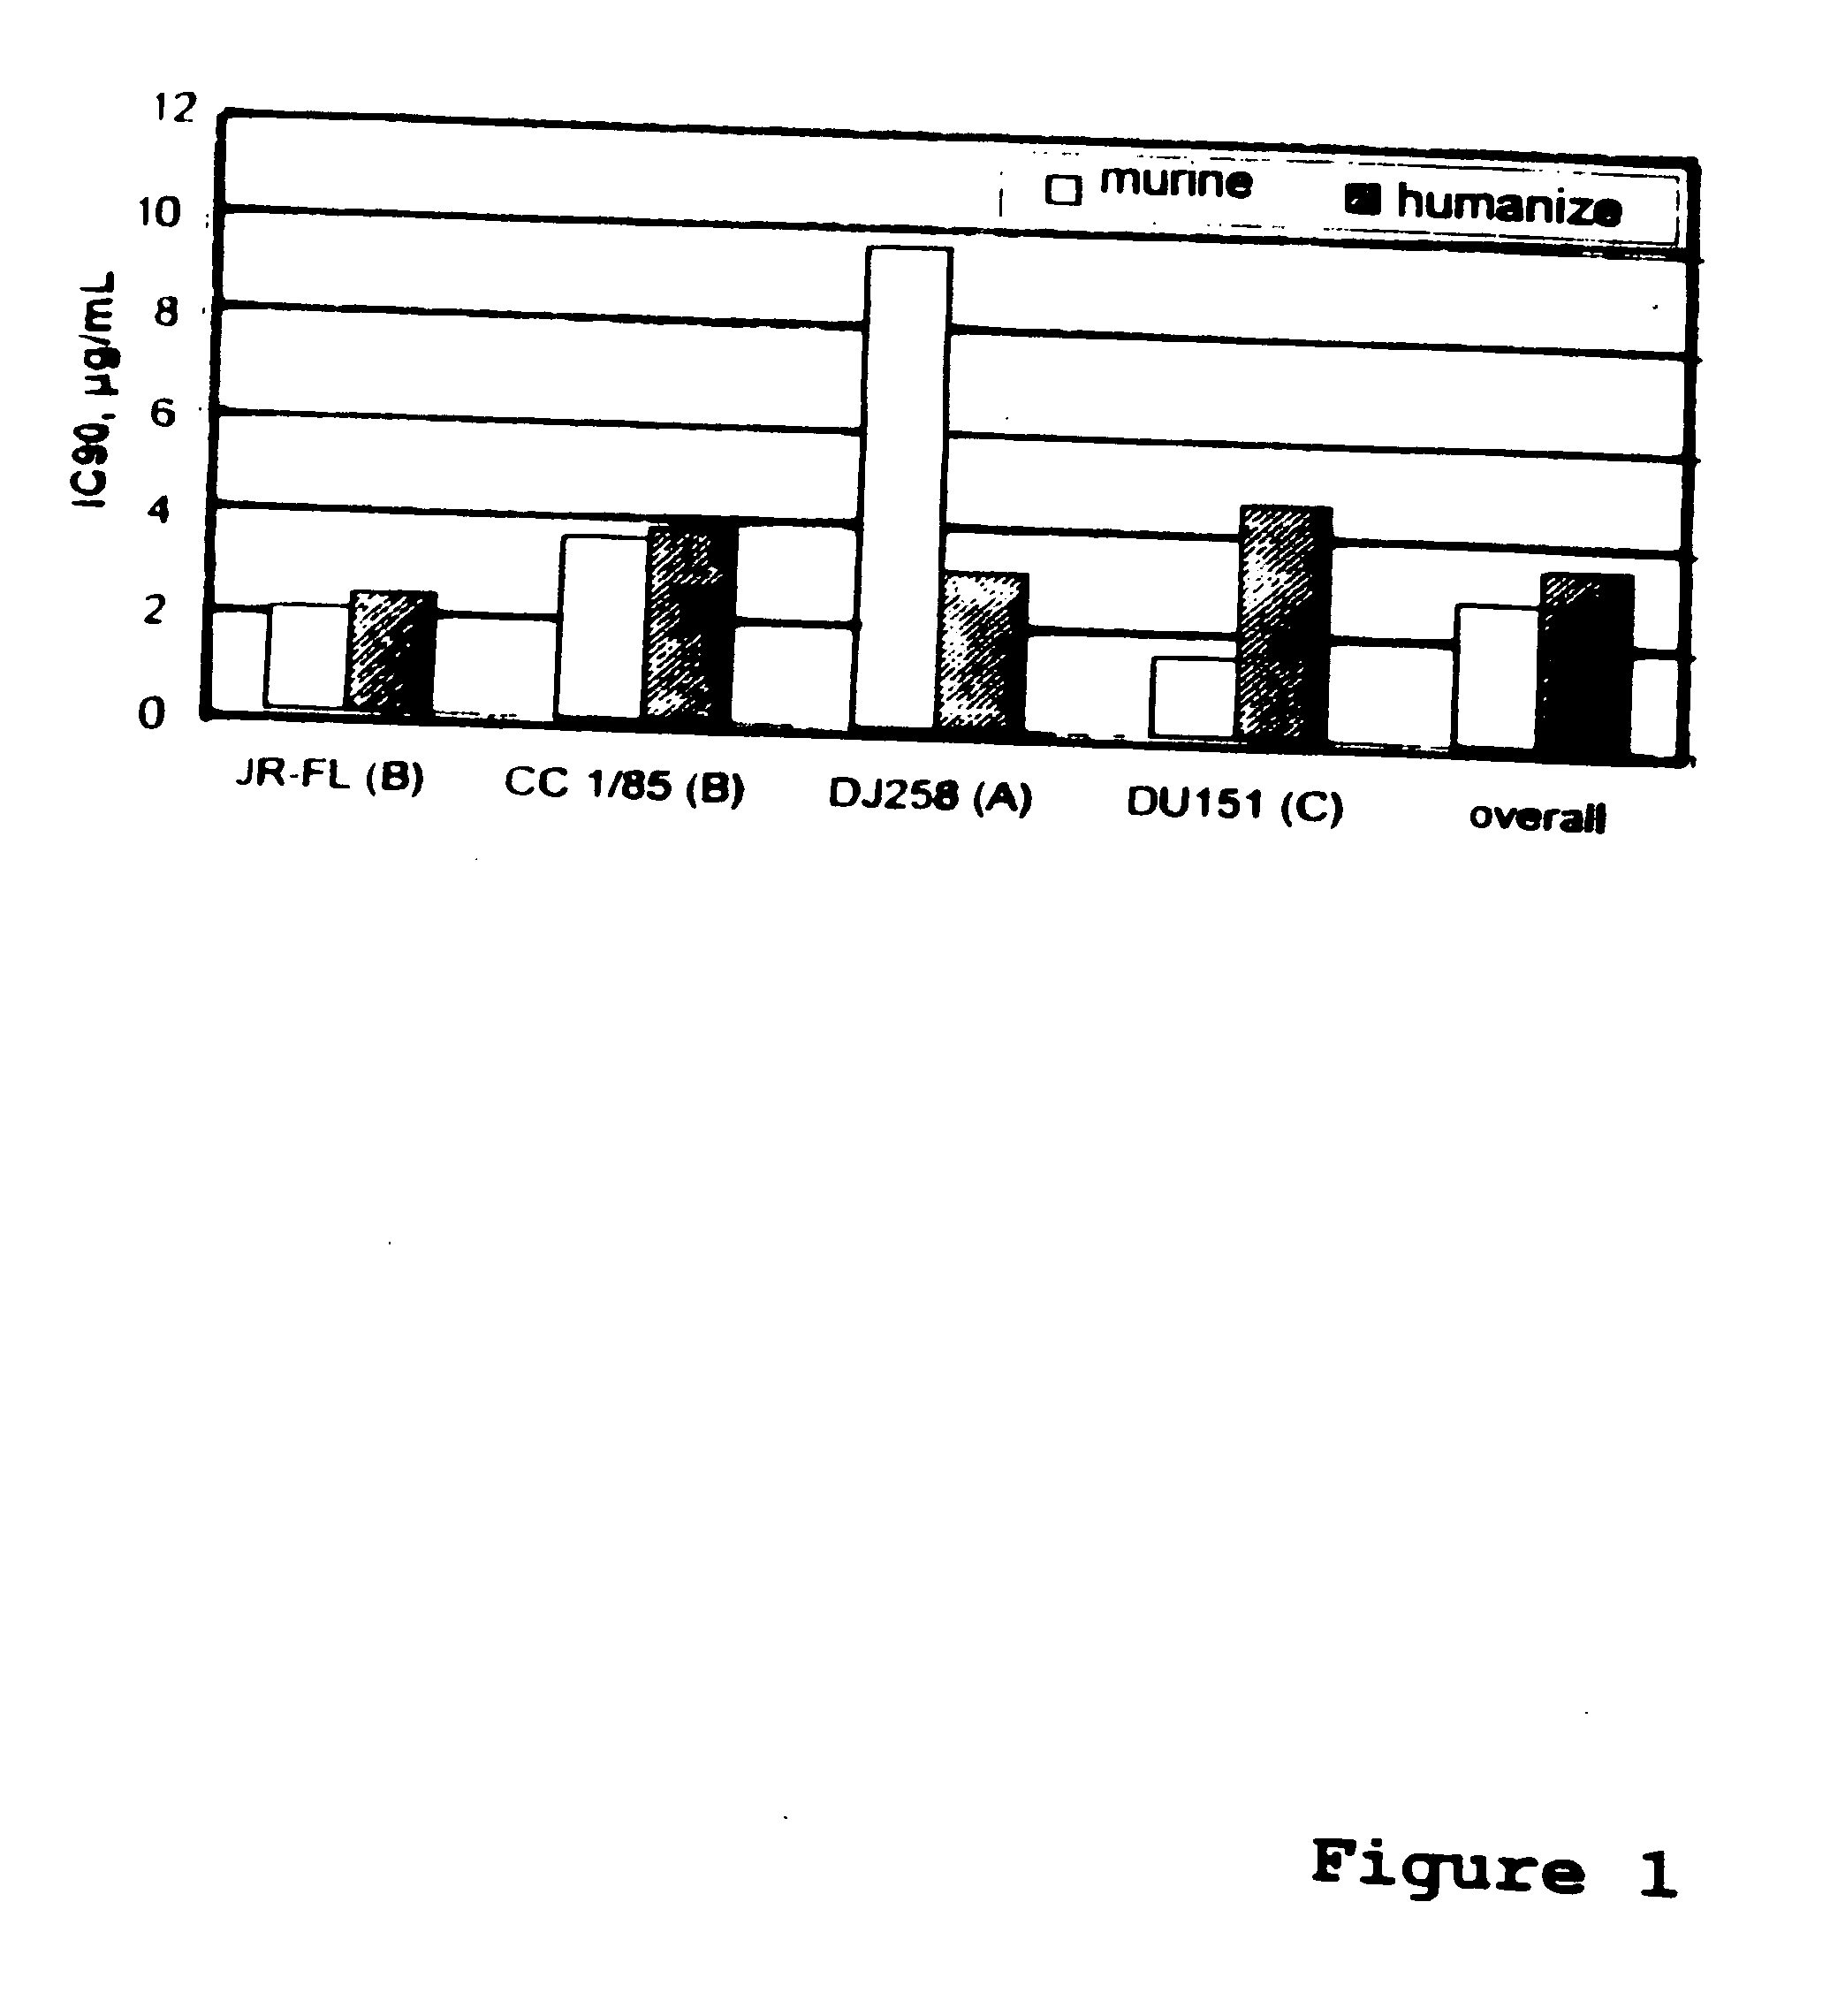 Methods for reducing viral load in HIV-1-infected patients